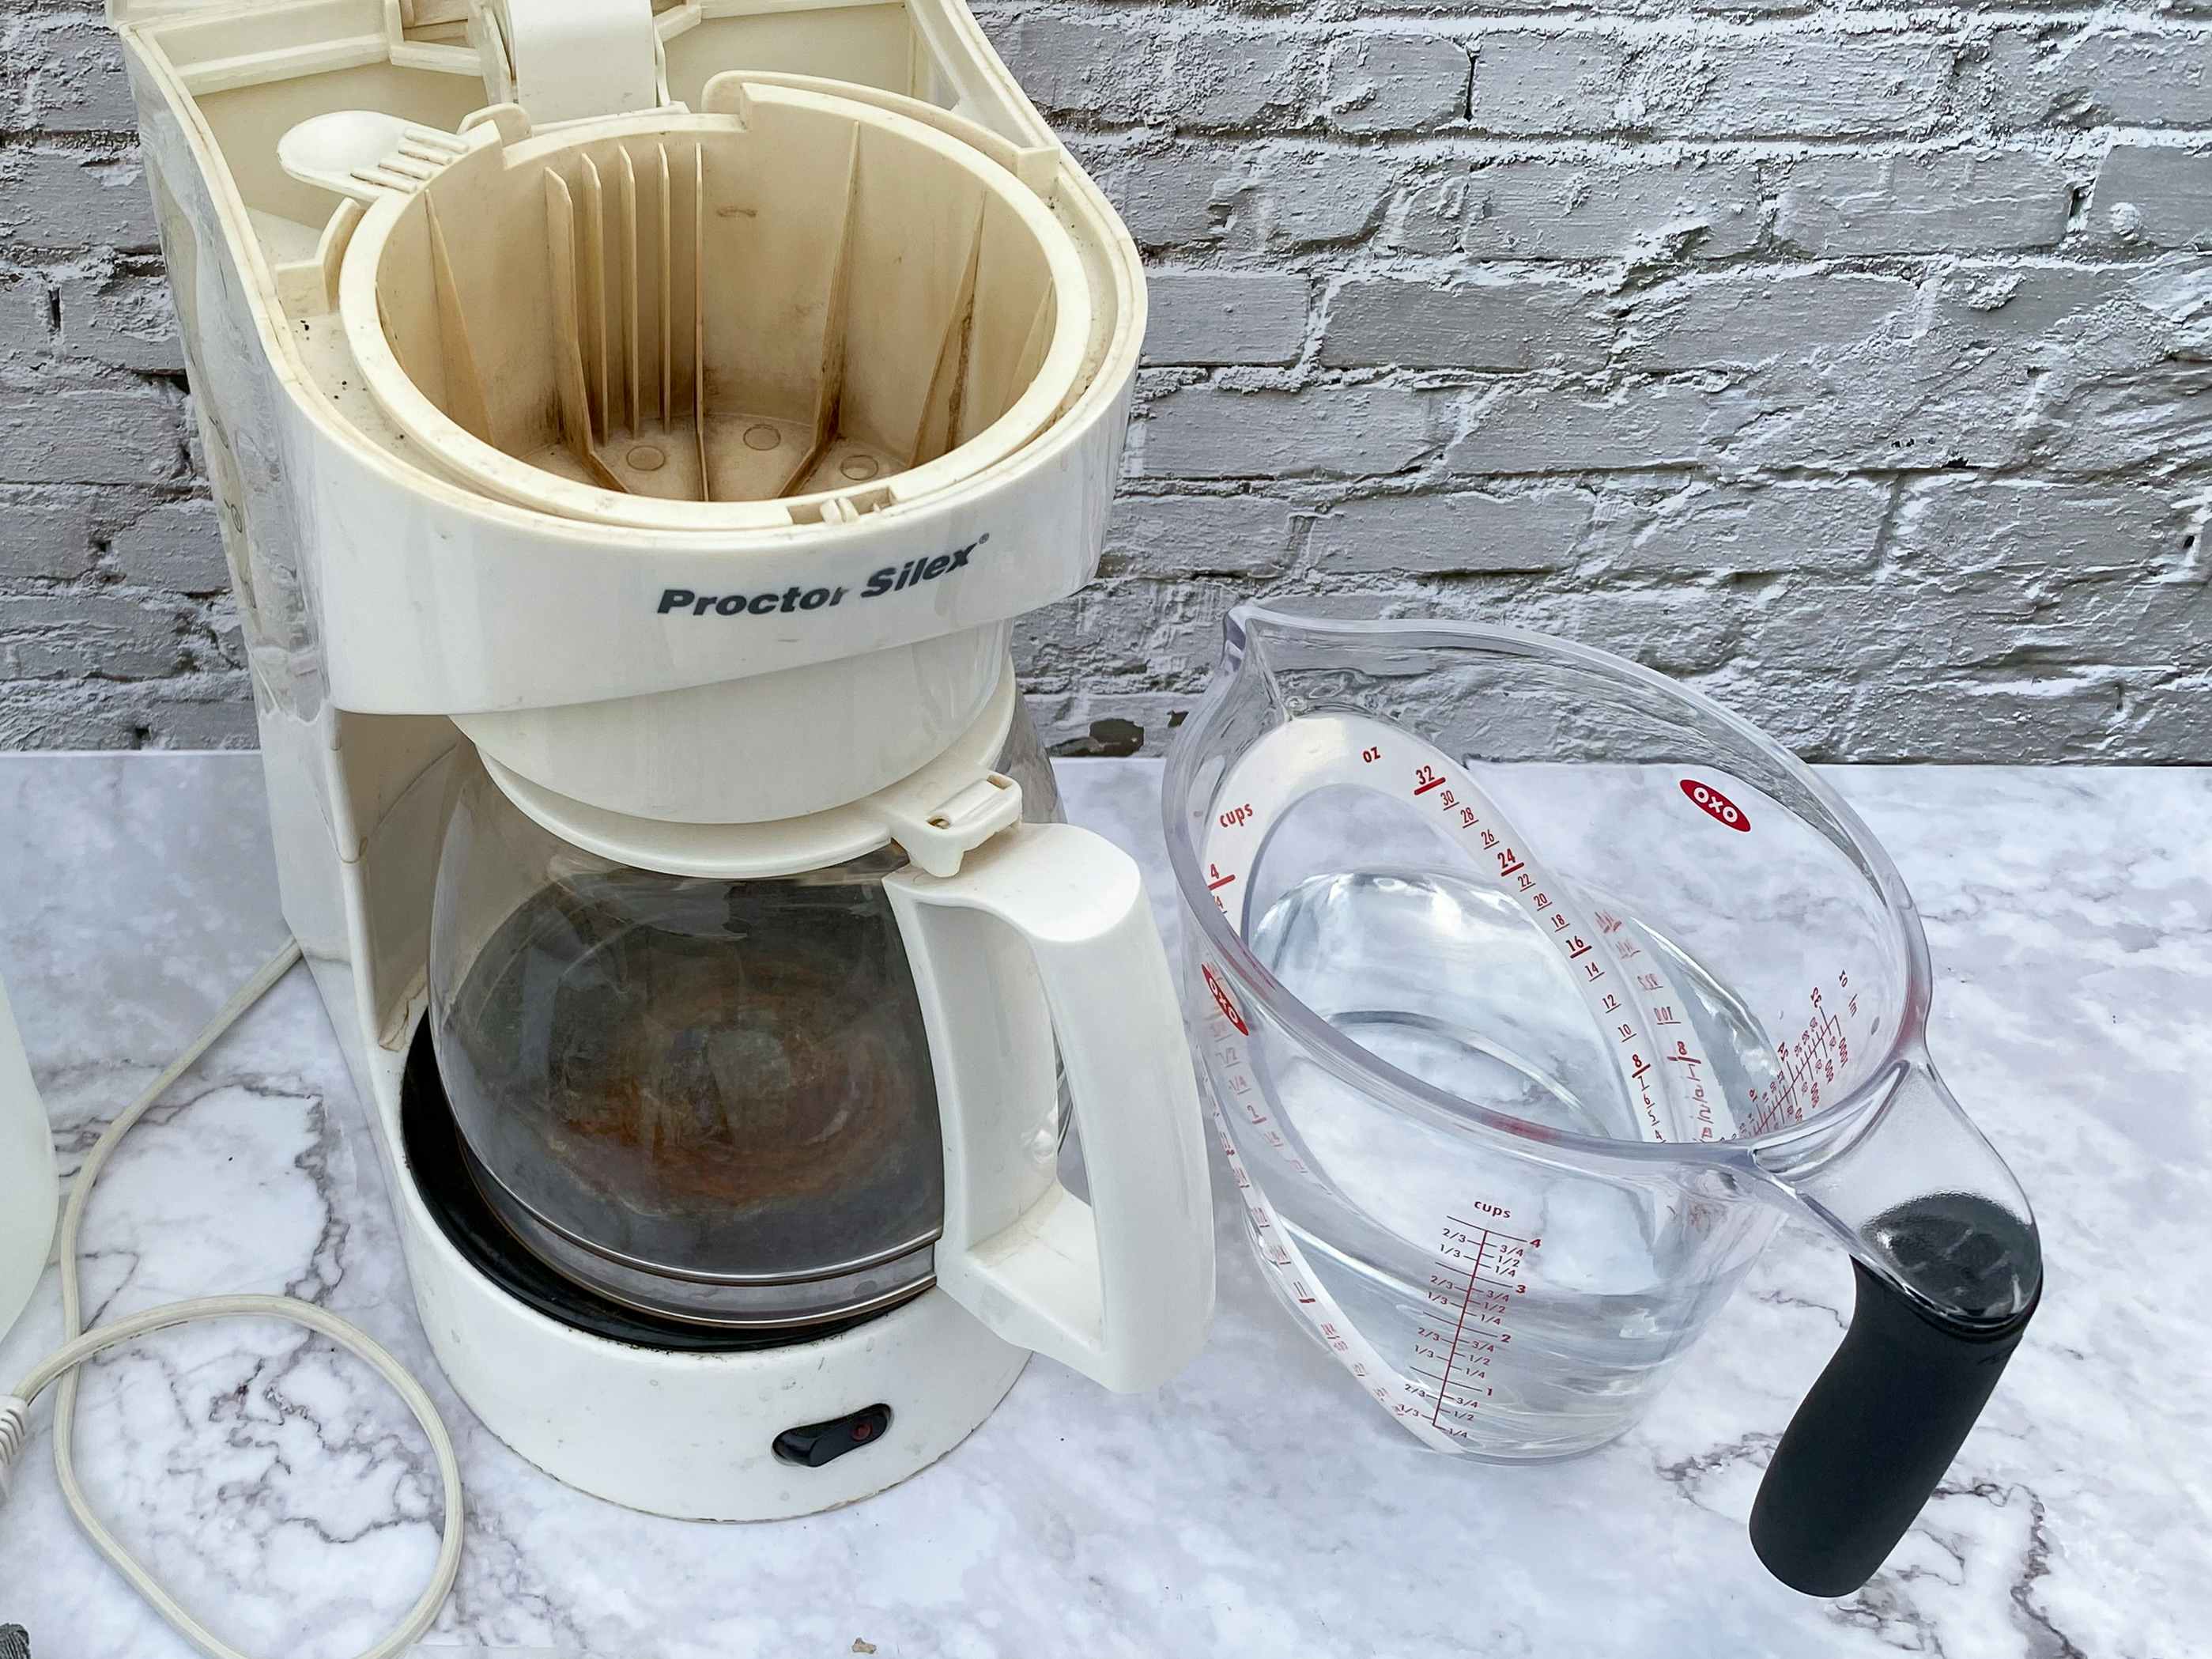 A coffee maker in need of cleaning on a counter next to a measuring cup of a water and vinegar mixture